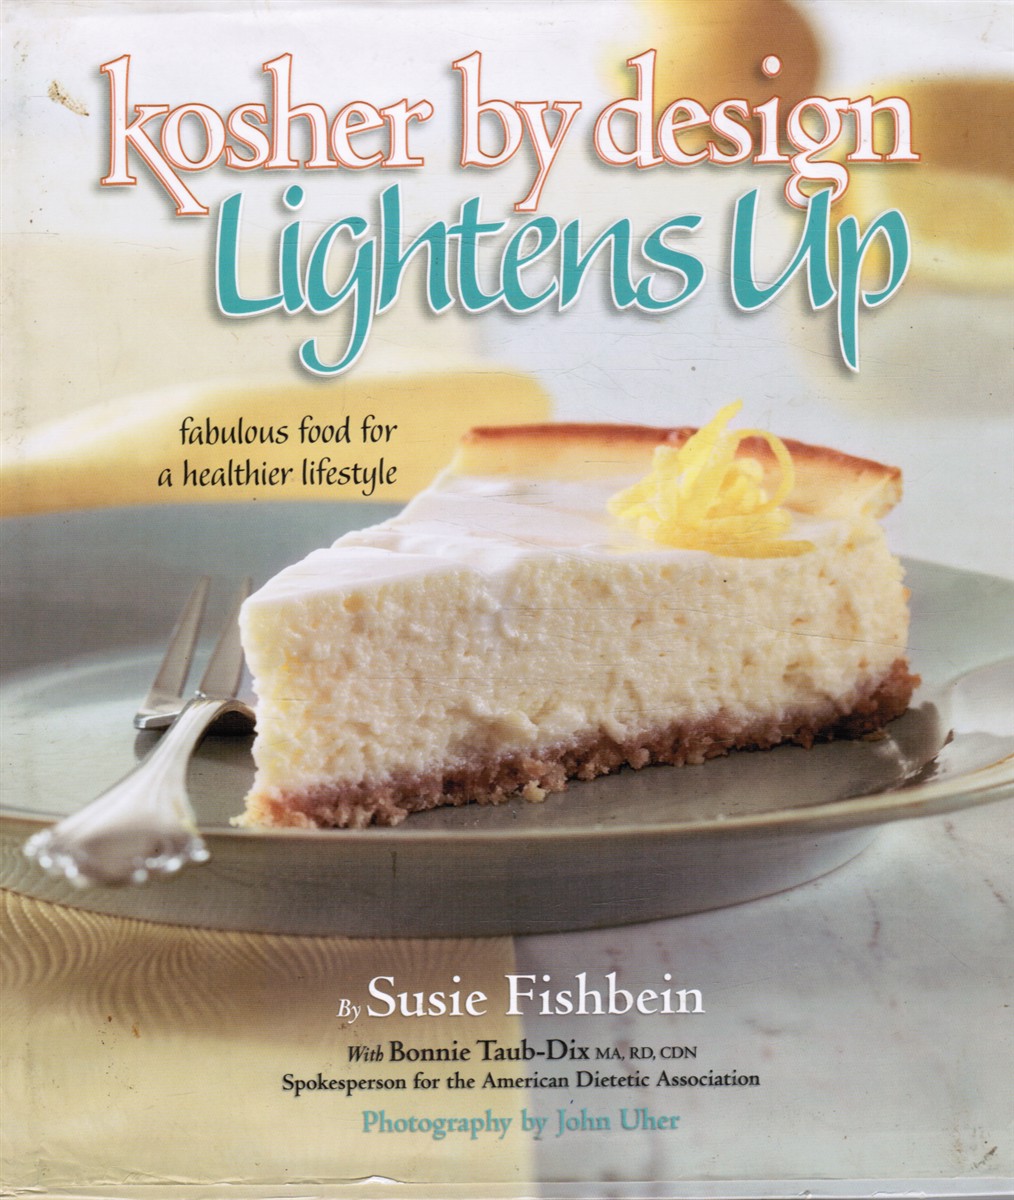 FISHBEIN, SUSIE & BONNIE TAUB-DIX - Kosher By Design Lightens Up - Fabulous Food for a Healthier Lifestyle